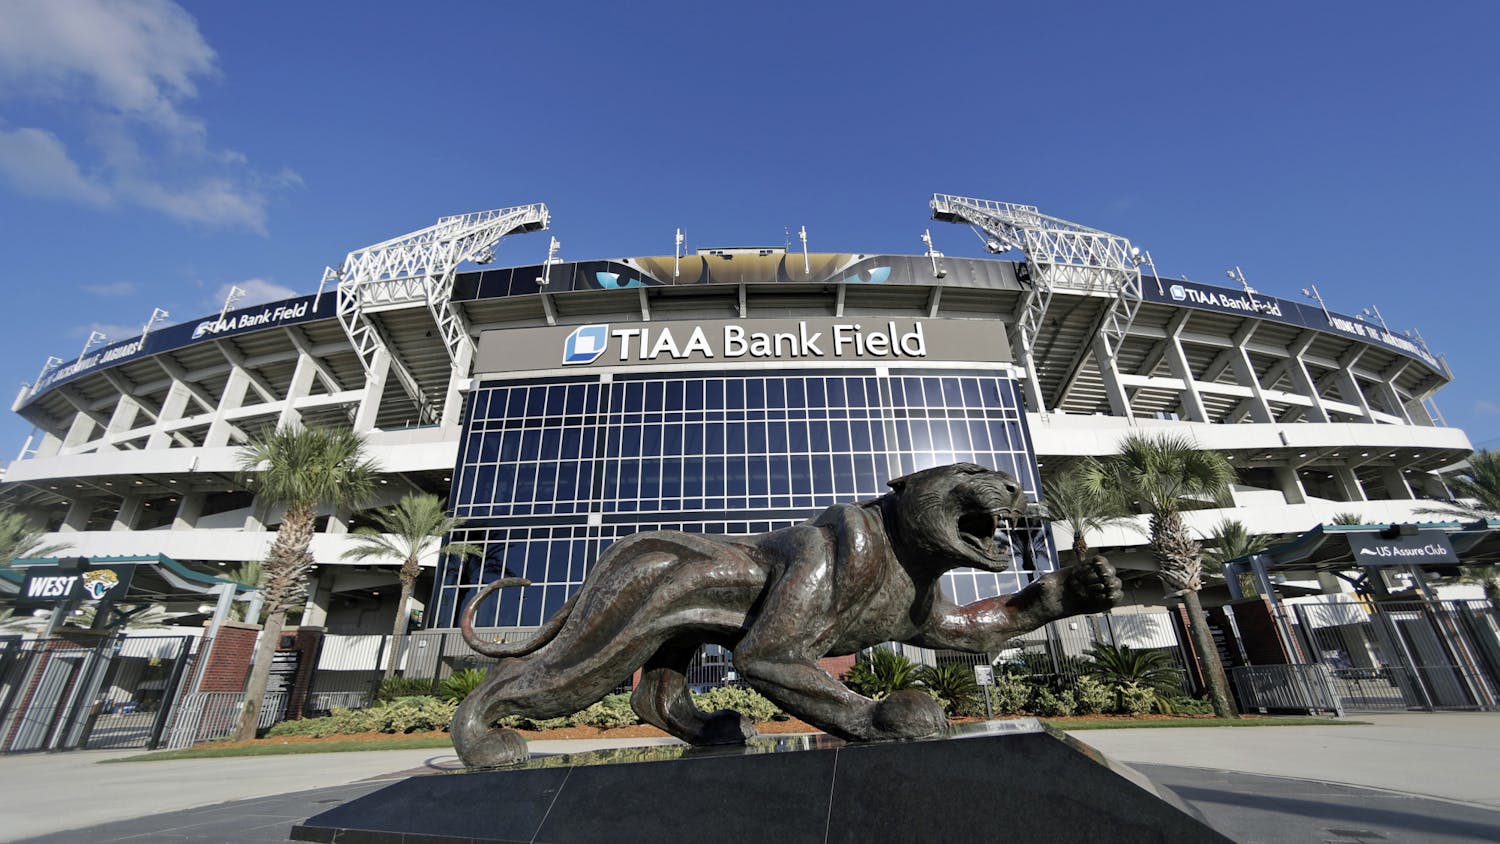 TIAA Bank Field, the home stadium of the NFL’s Jacksonville Jaguars, also serves as host for the annual Florida-Georgia game. (AP Photo/John Raoux)